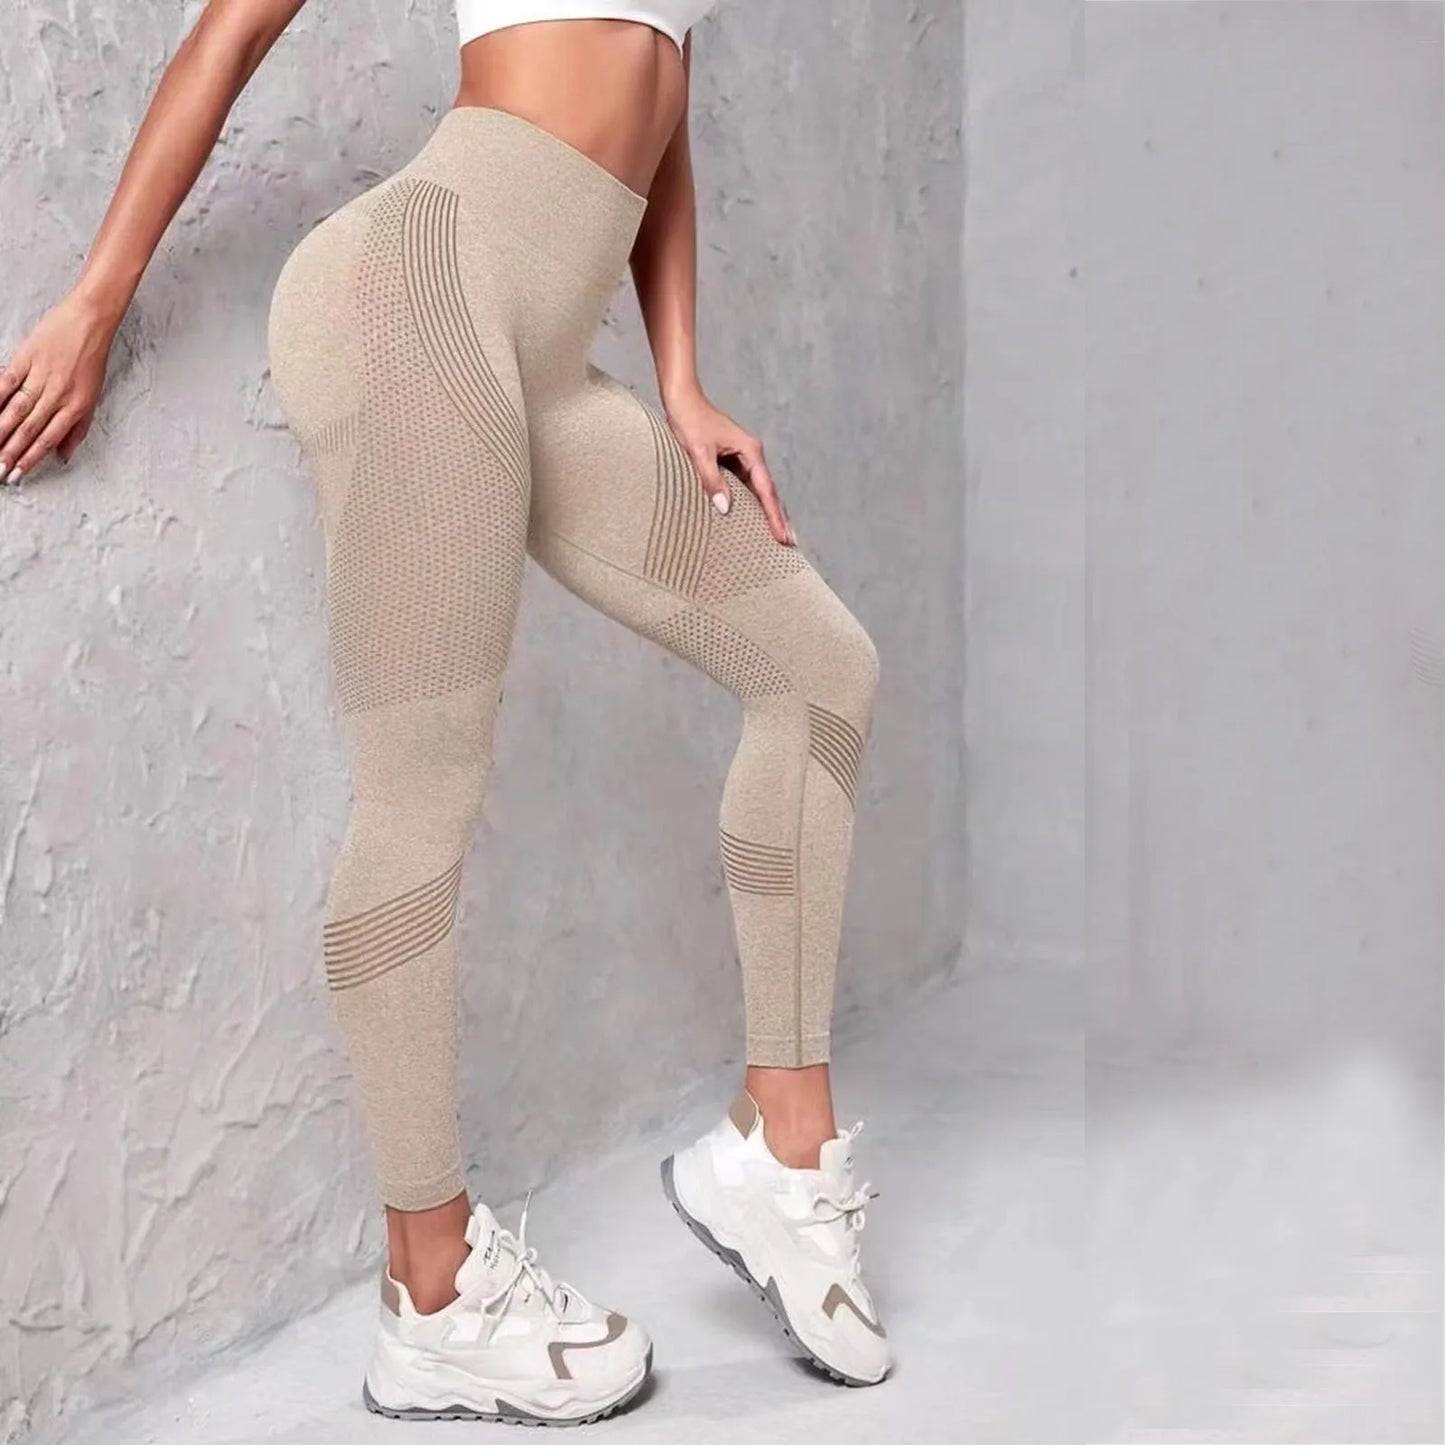 Push Up Sports Pants Legging Female pantalones Fitness Solid High Waist Sexy Elastic Workout Tights Comfortable Leggings Women